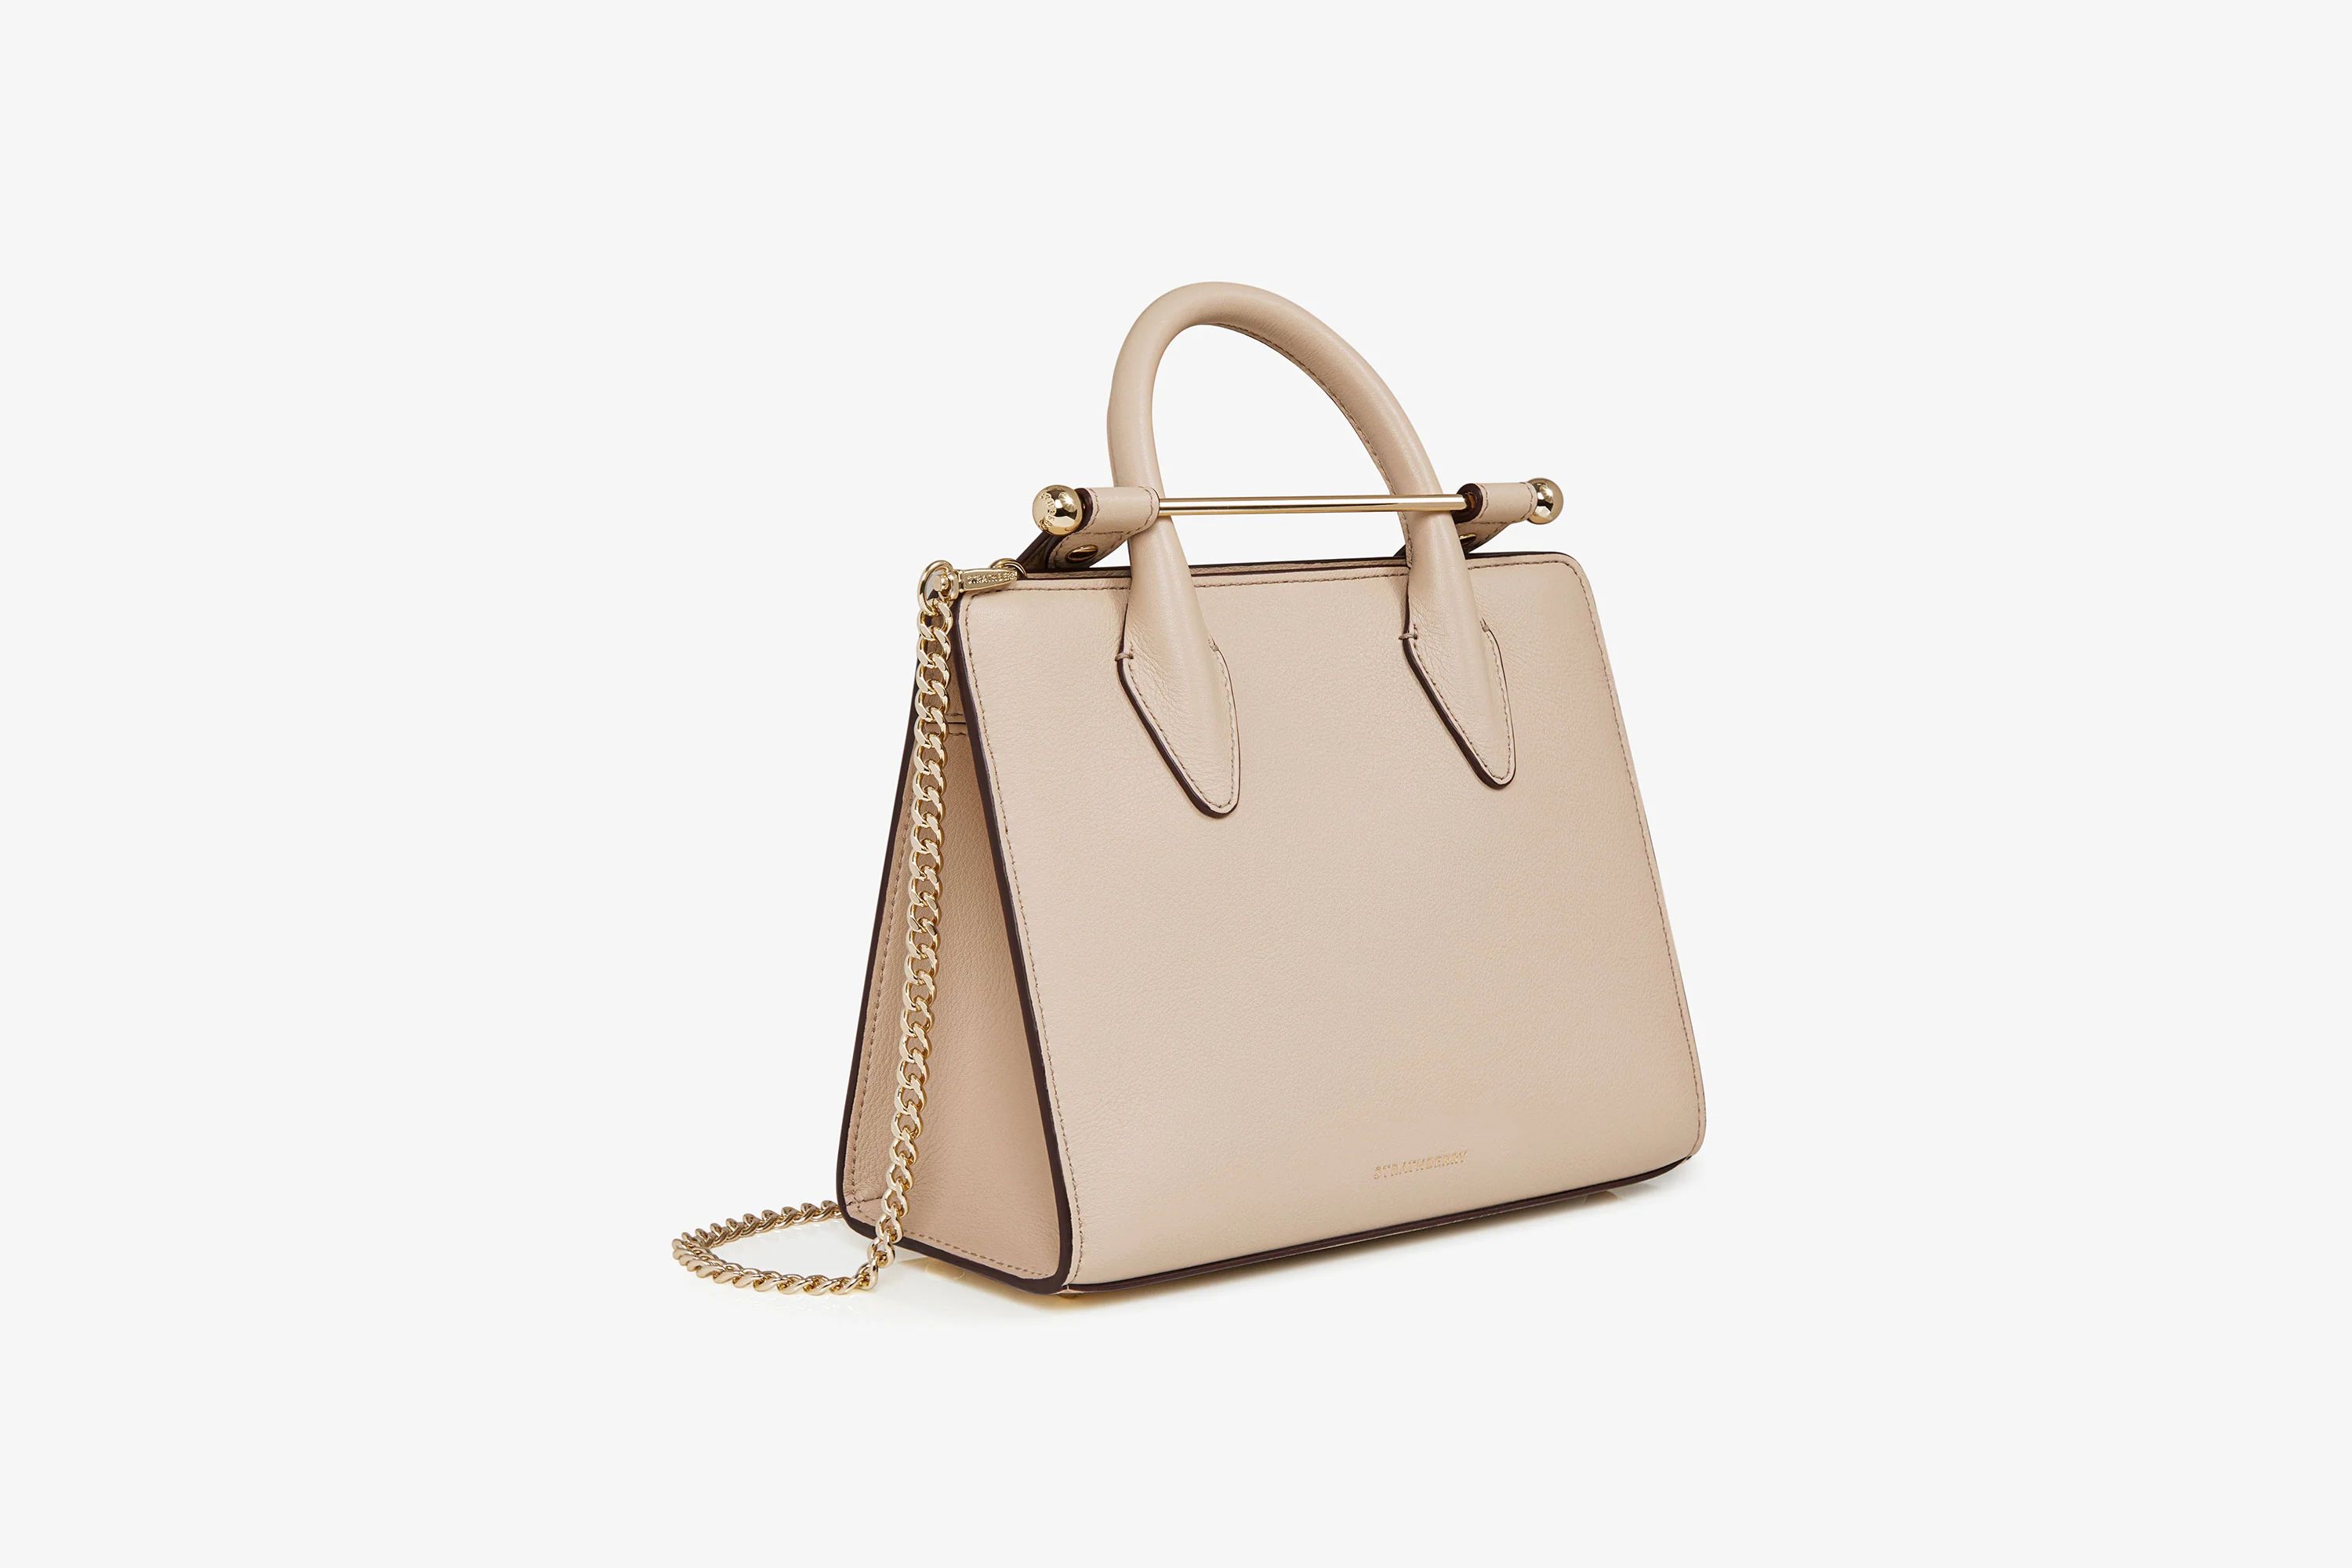 The Strathberry Mini Tote | Strathberry